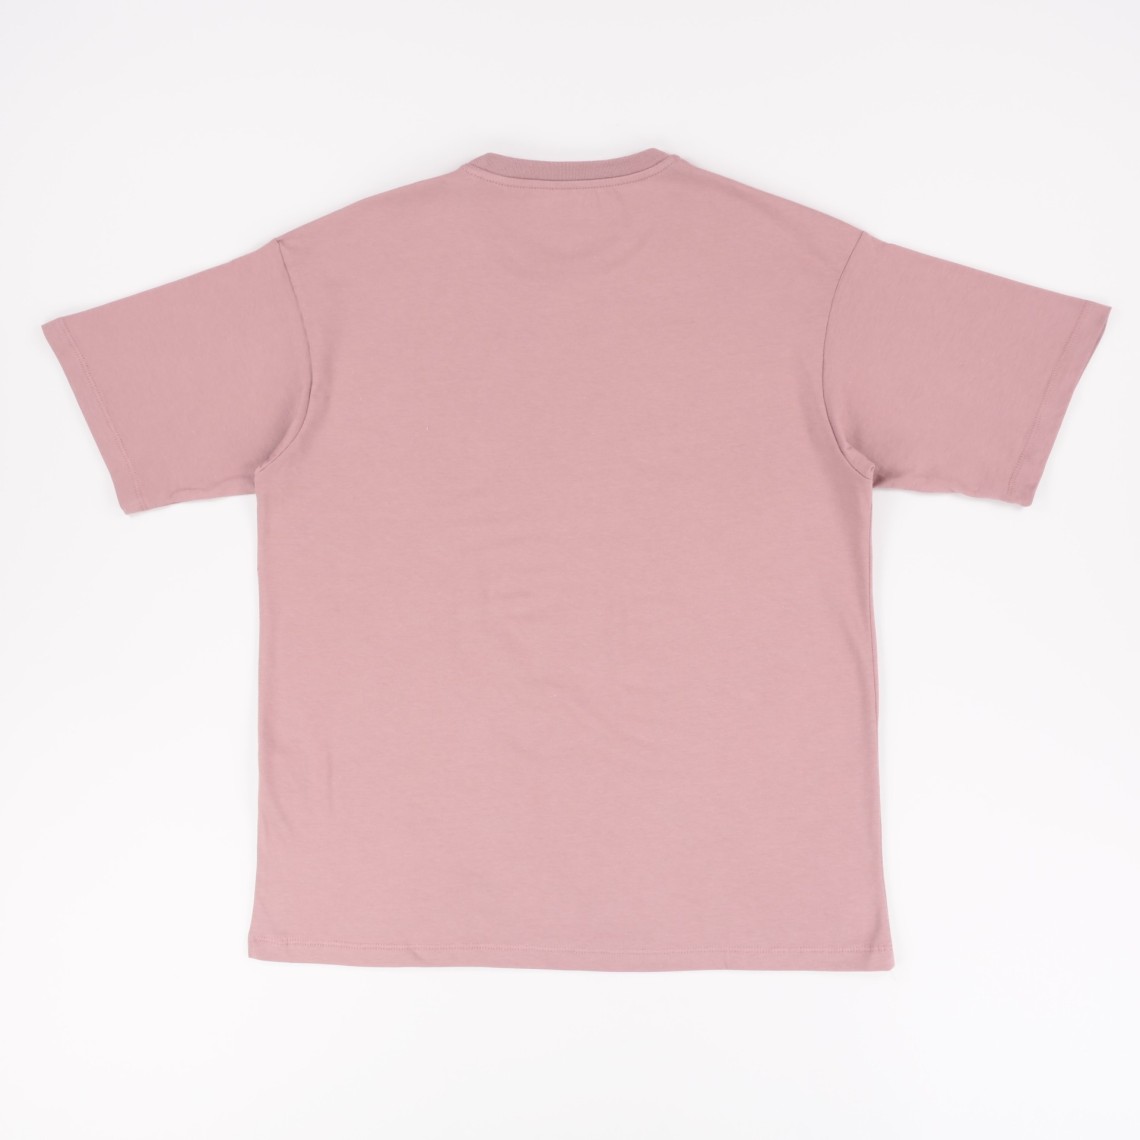 W S/S CHASE T-SHIRT